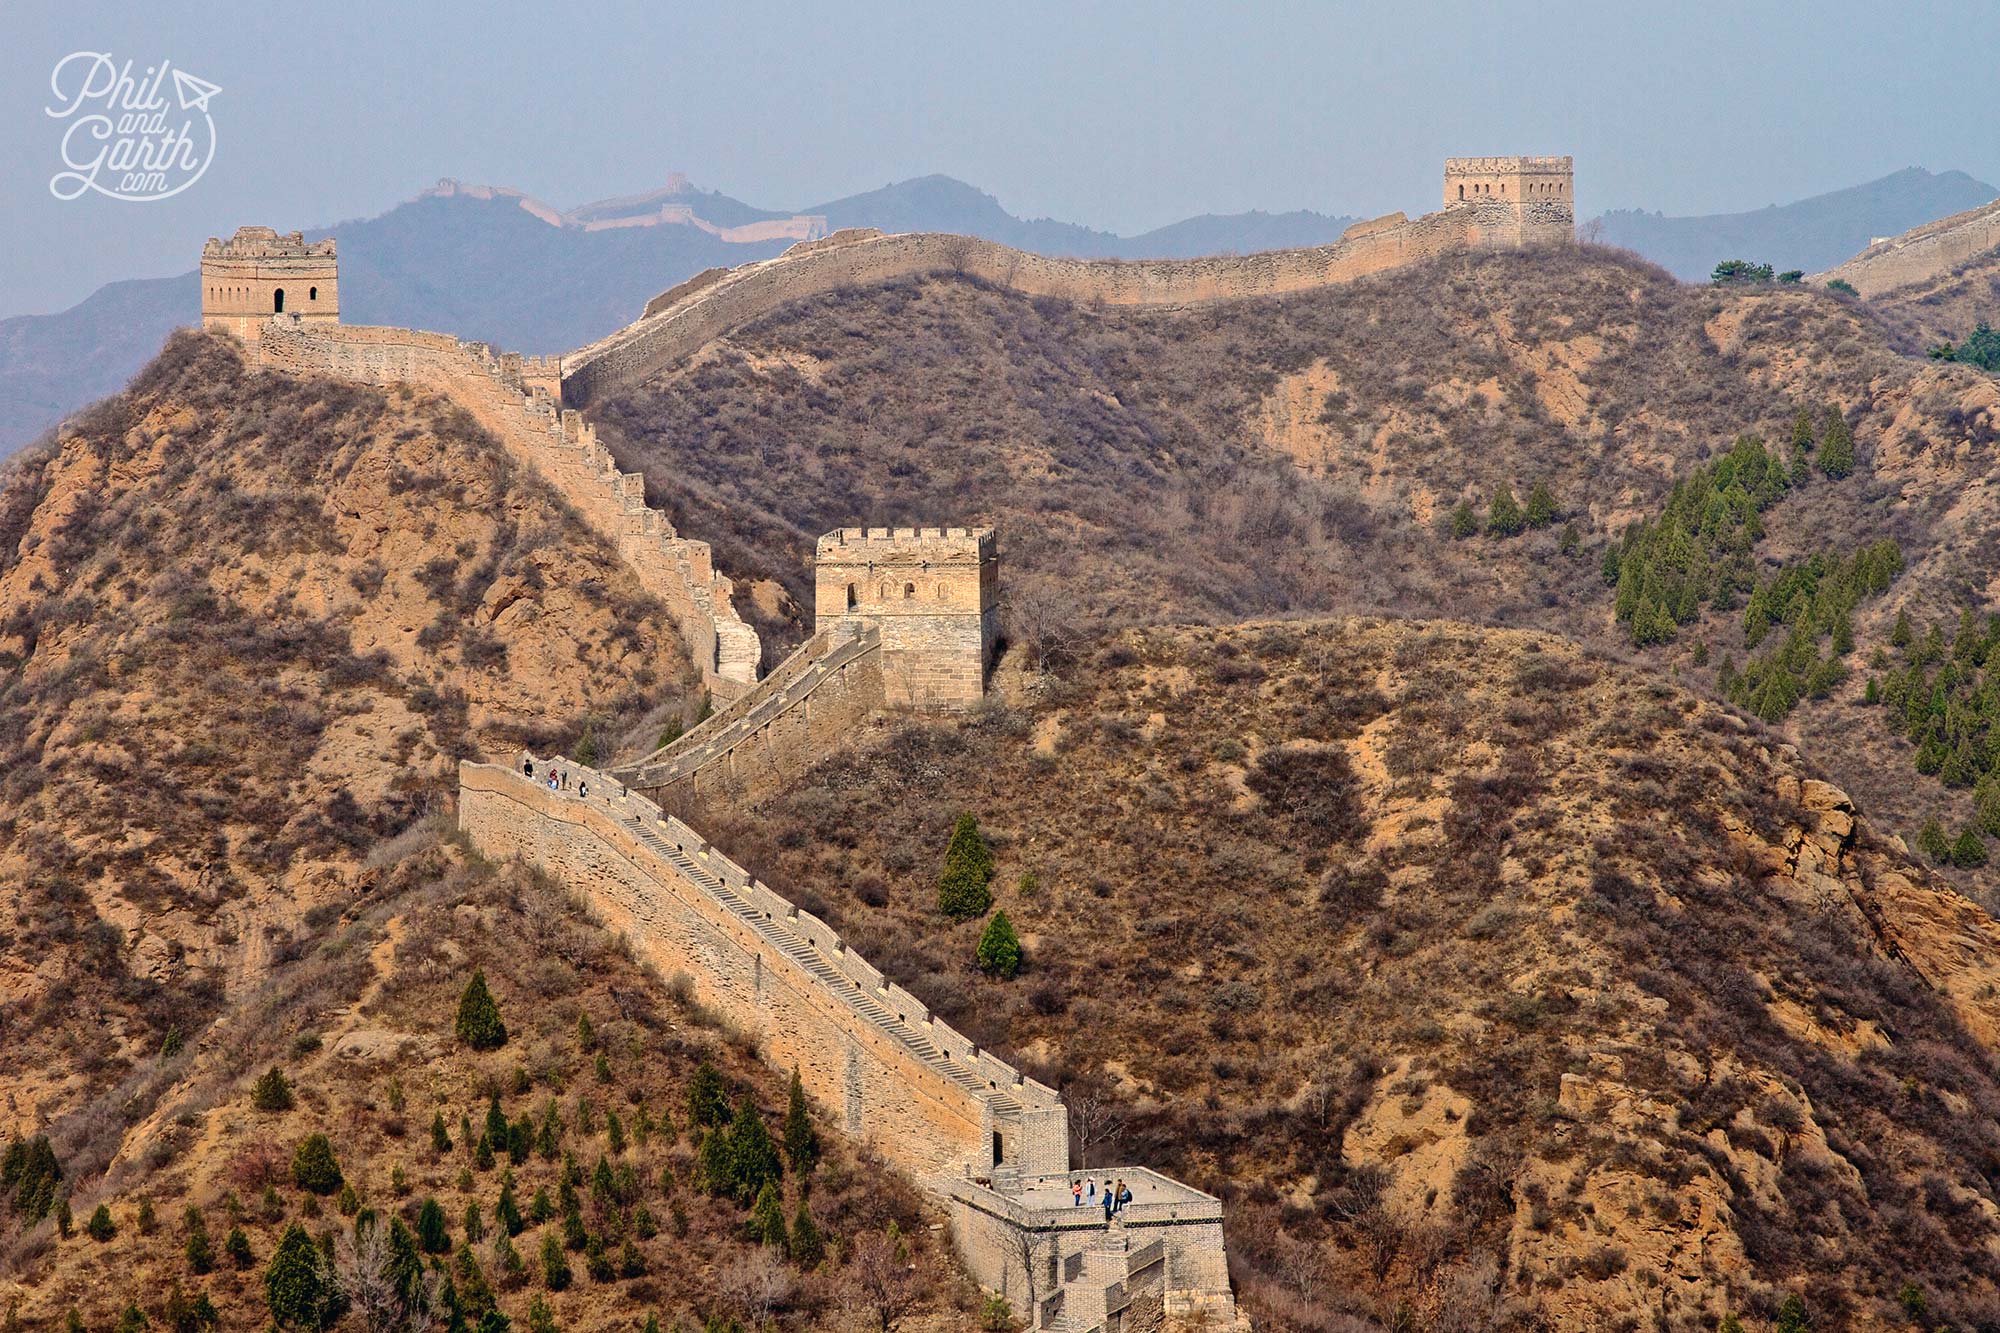 So many amazing views on our hike of the Great Wall of China